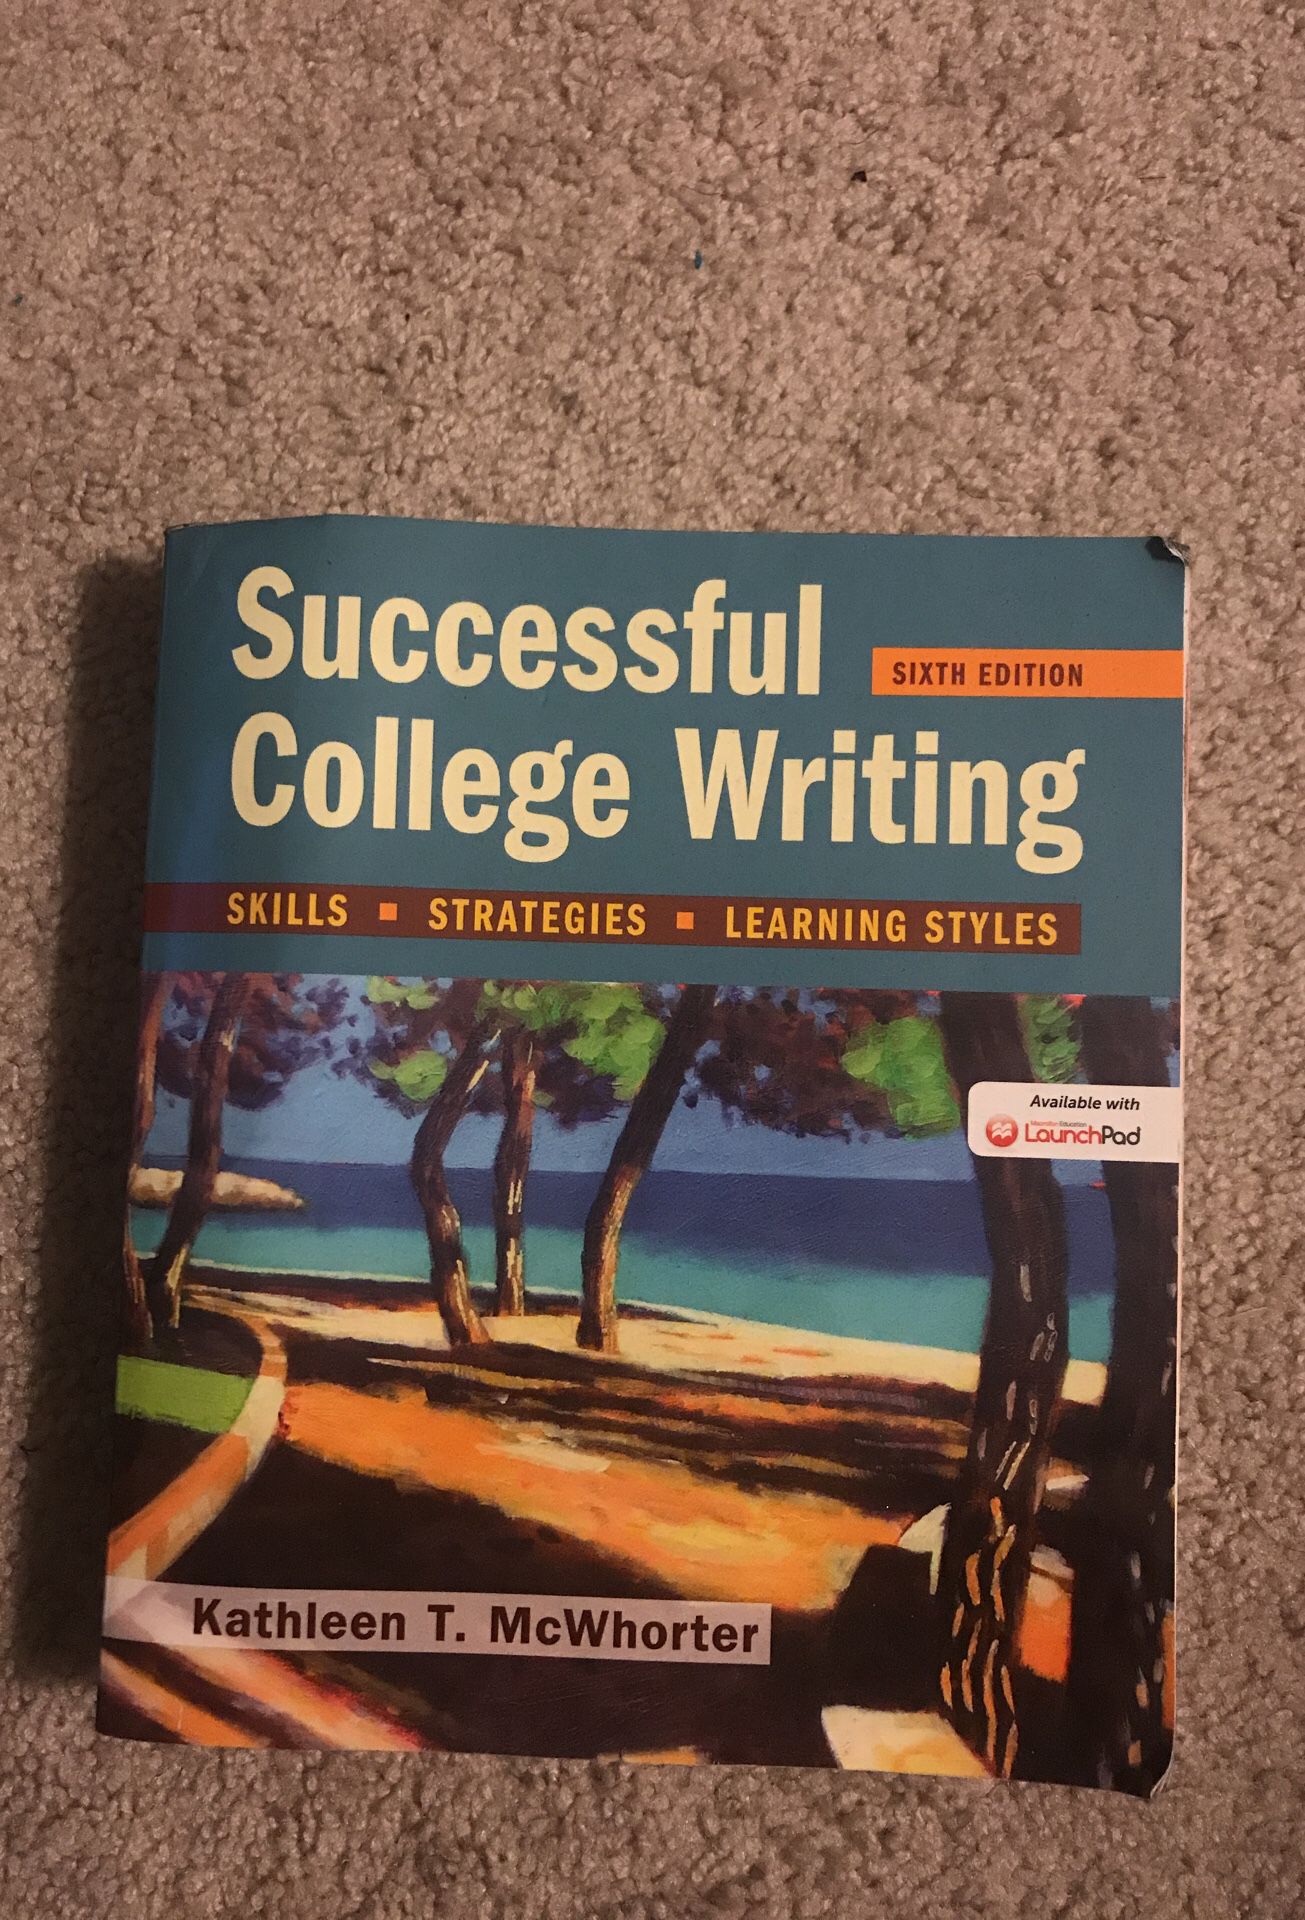 Successful college writing book 6th edition by Kathleen T. McWhorter